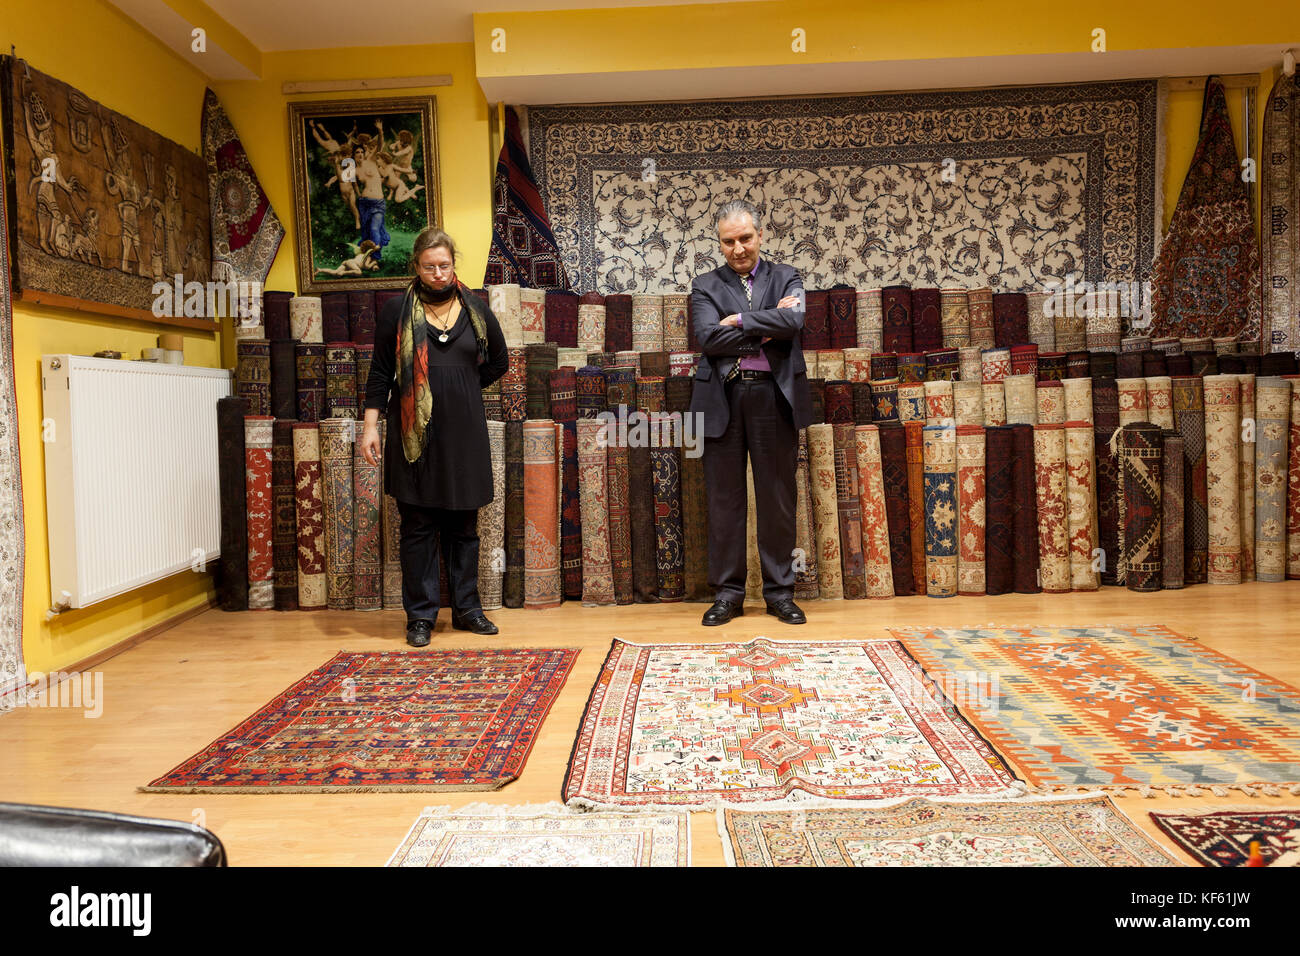 Carpet seller offering colorful oriental carpets at his store Stock Photo